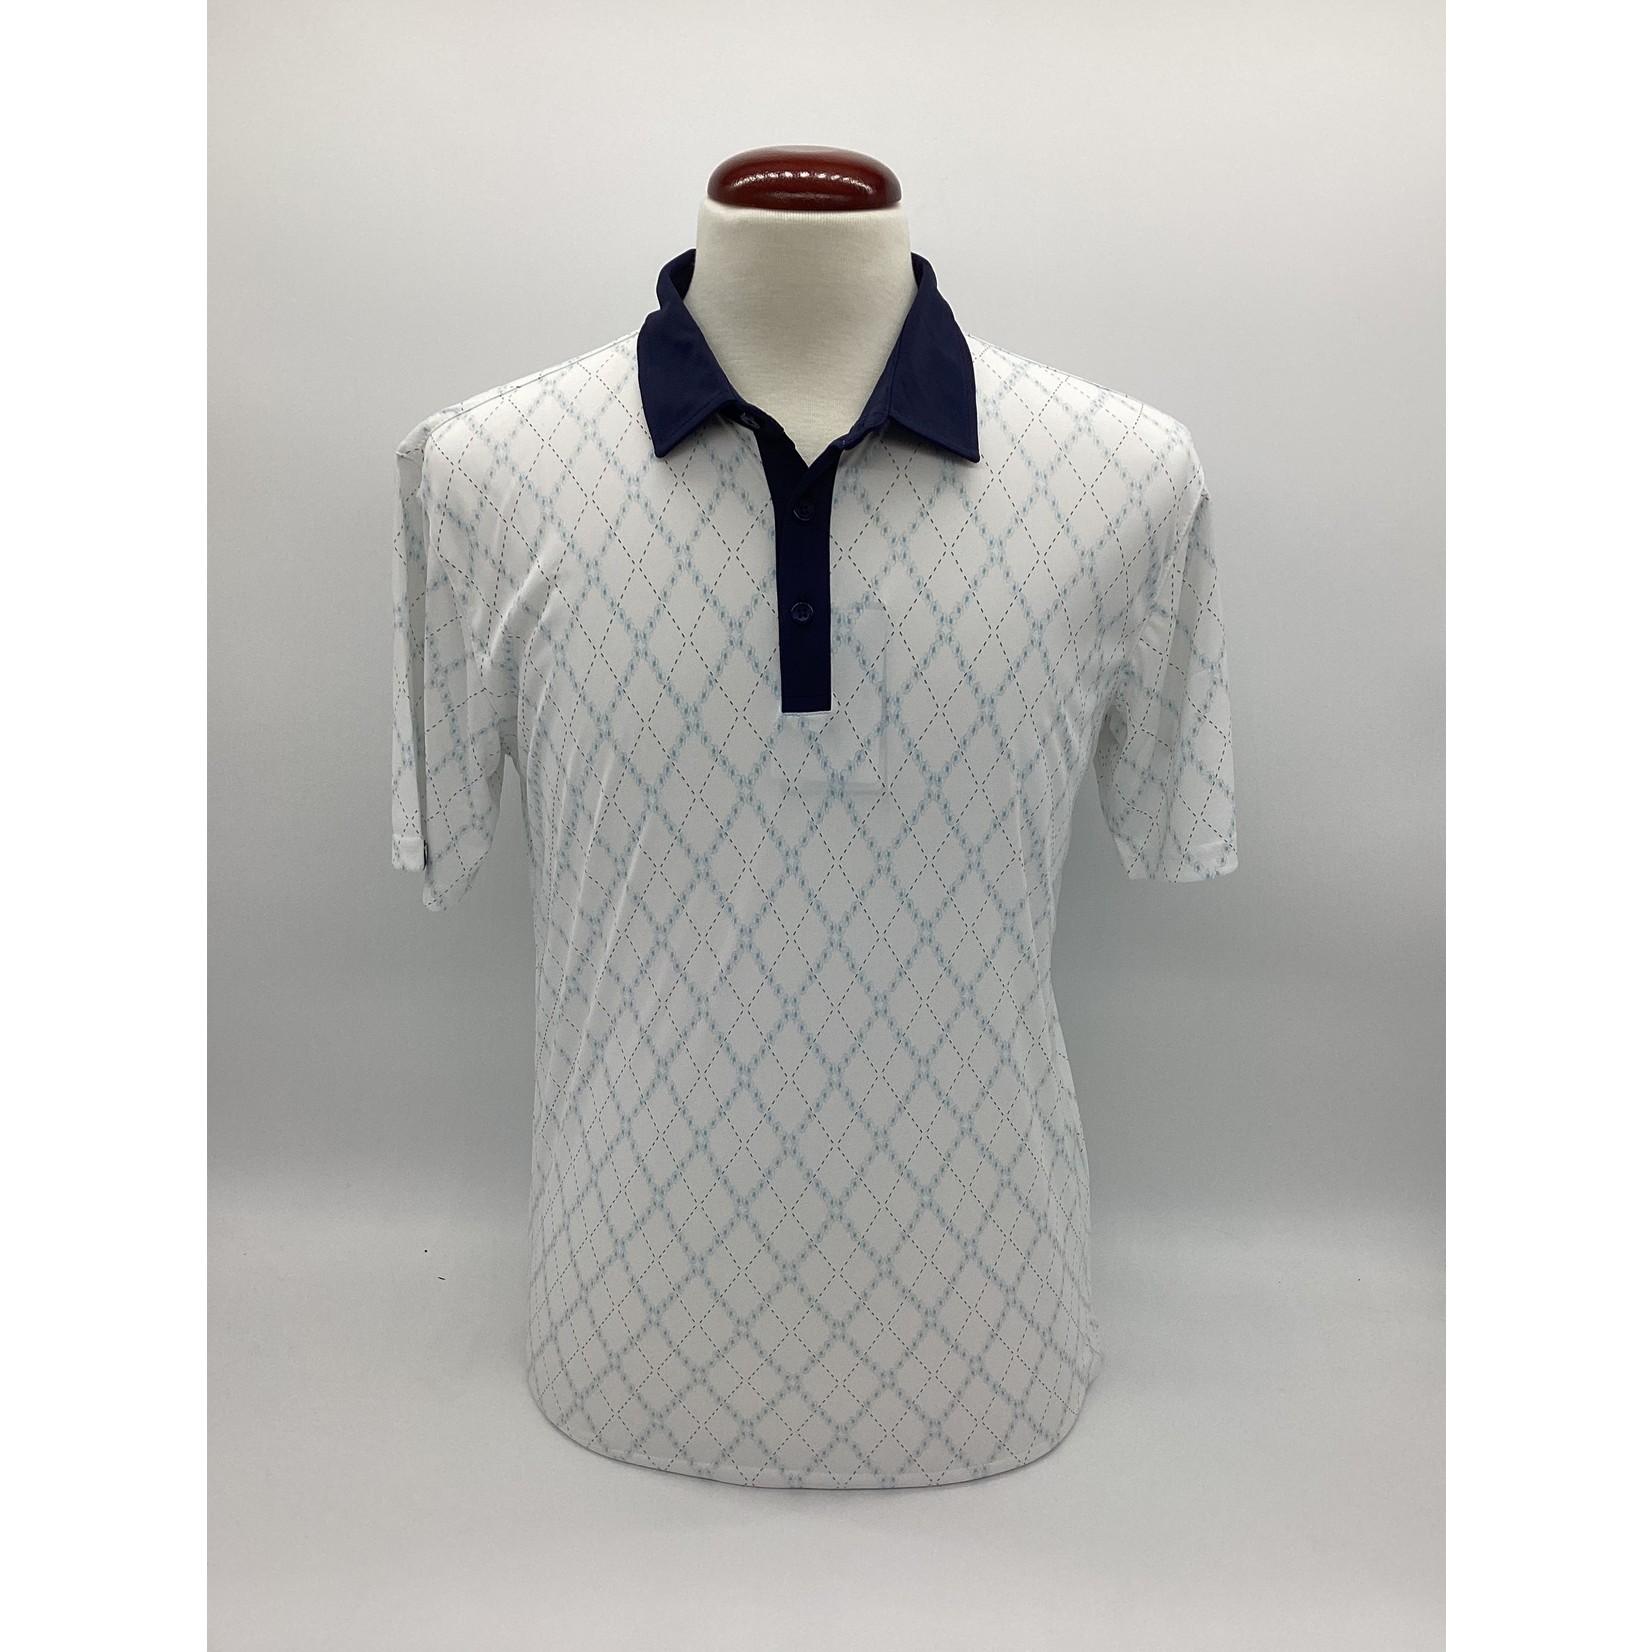 Swannies Golf Swannies Kuhlman Polo White-Sky